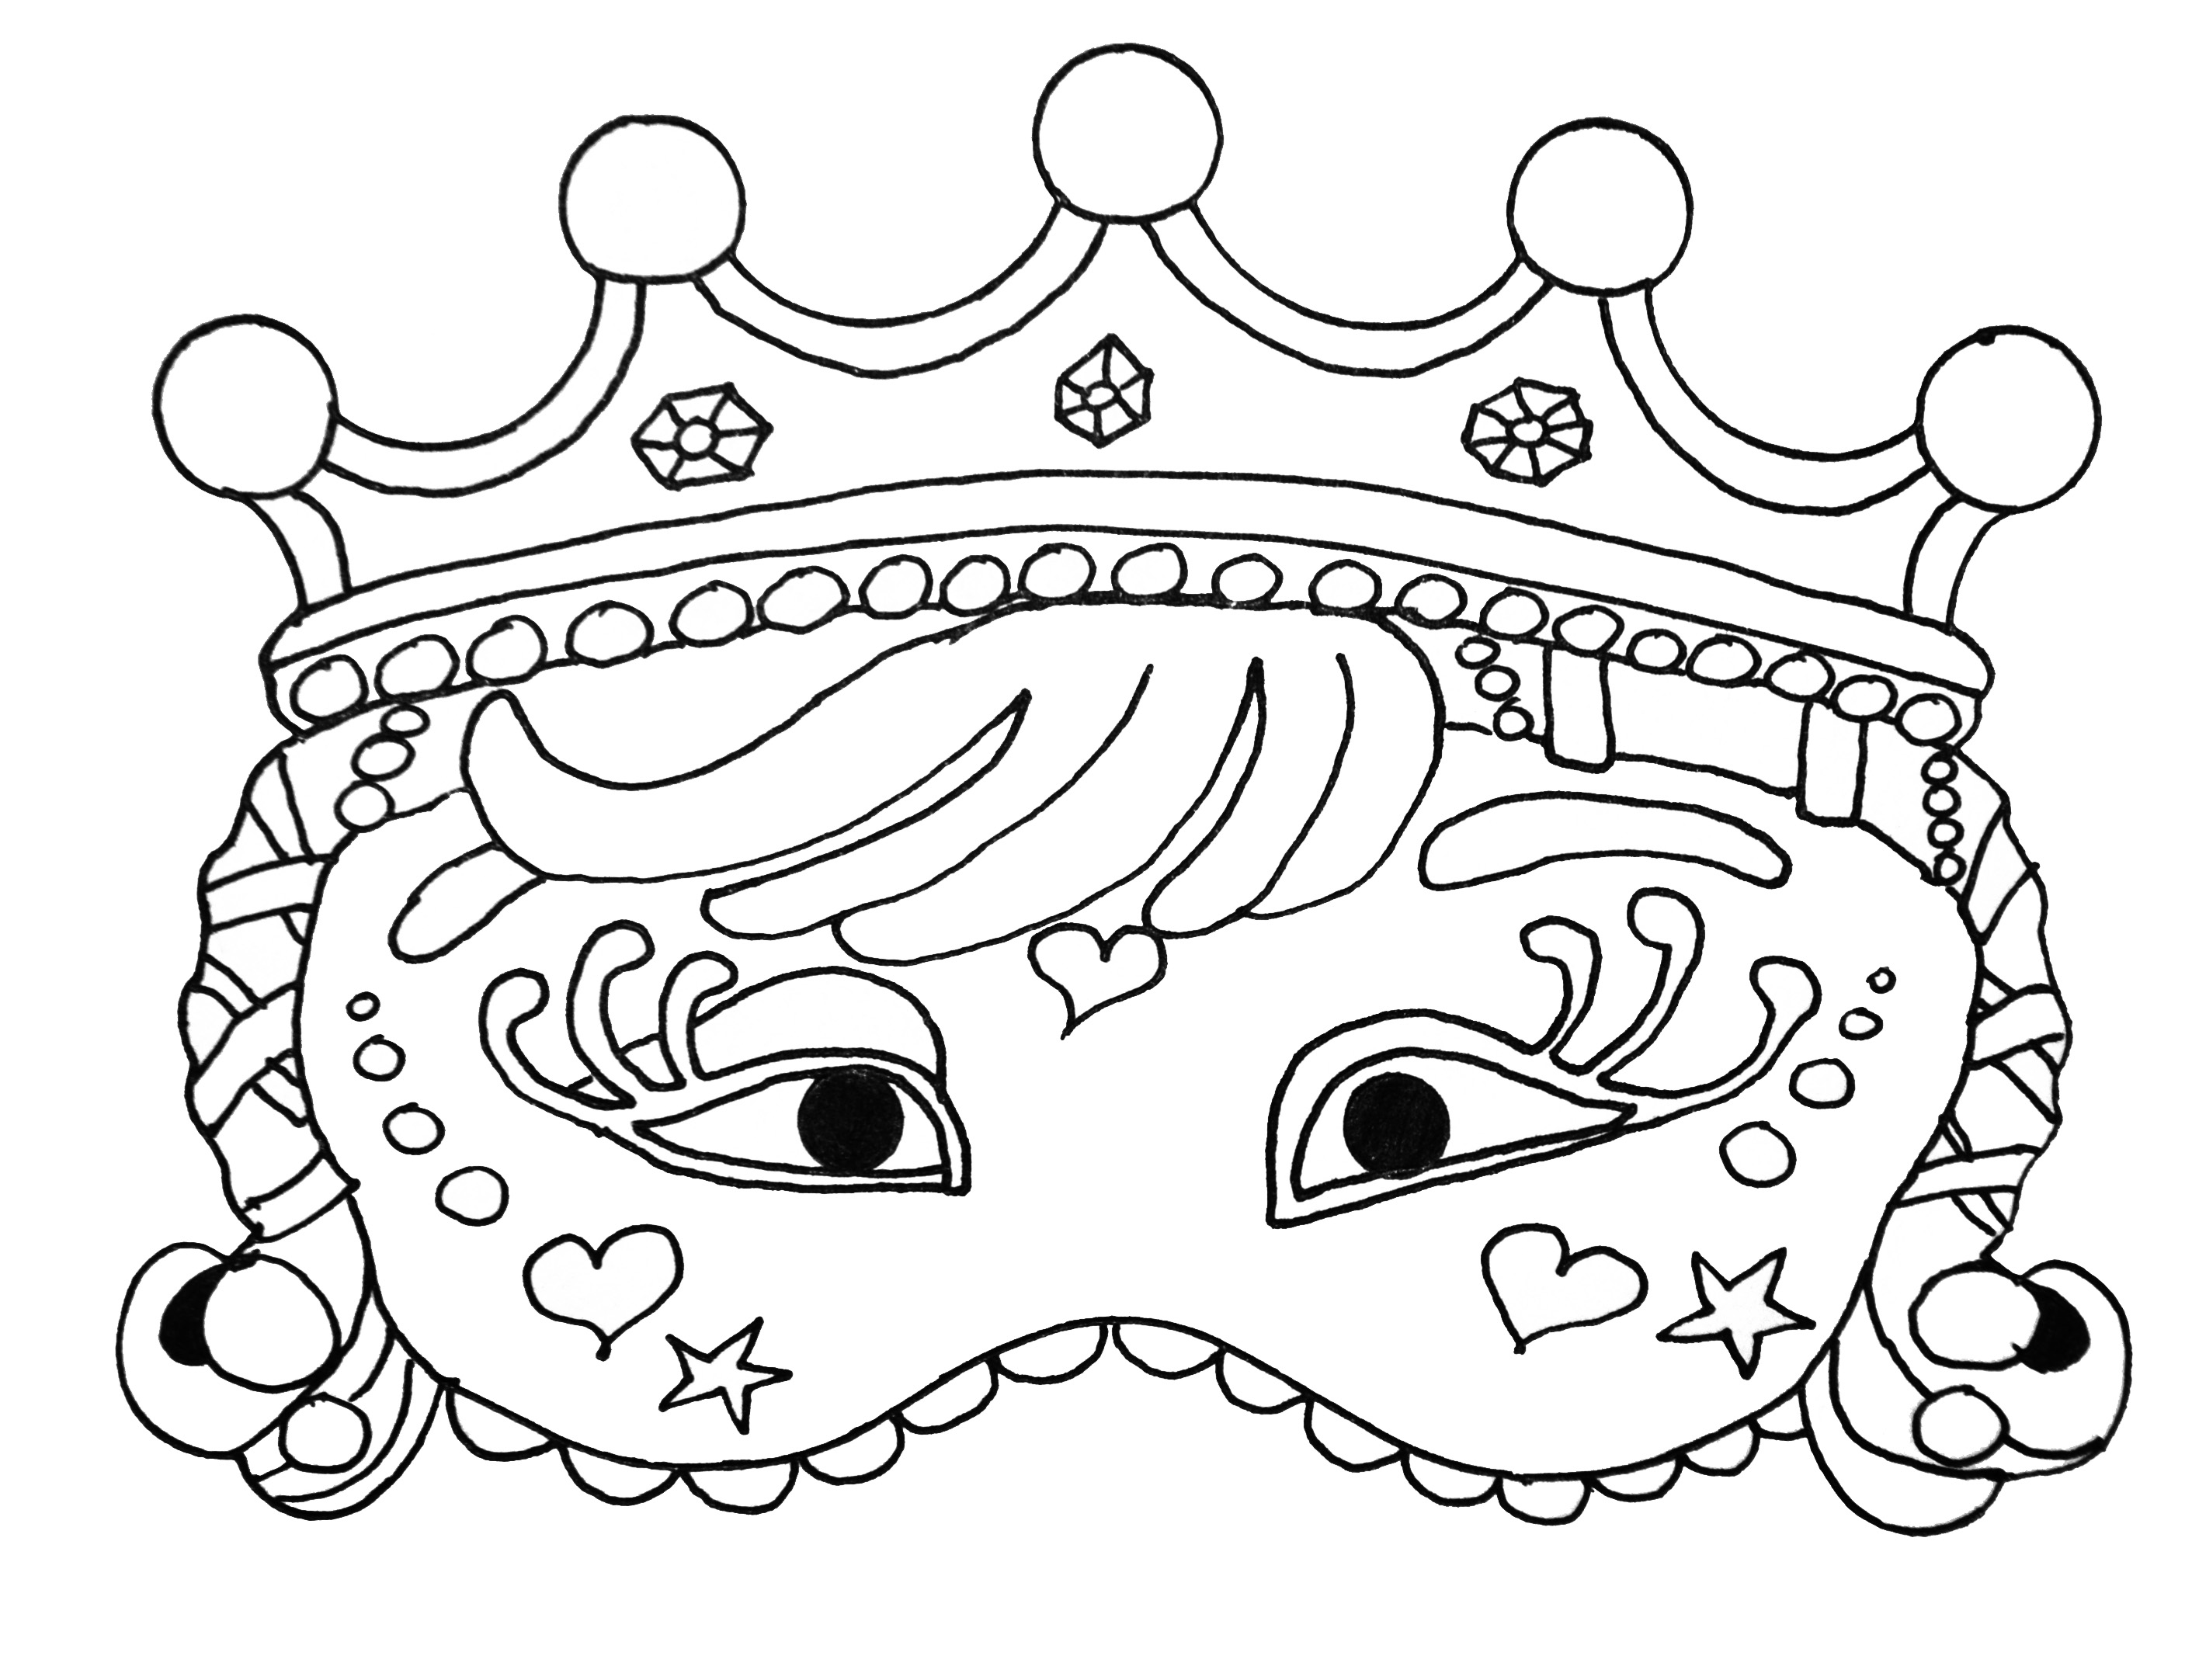 Carnival Mask for kids to print & color - 4